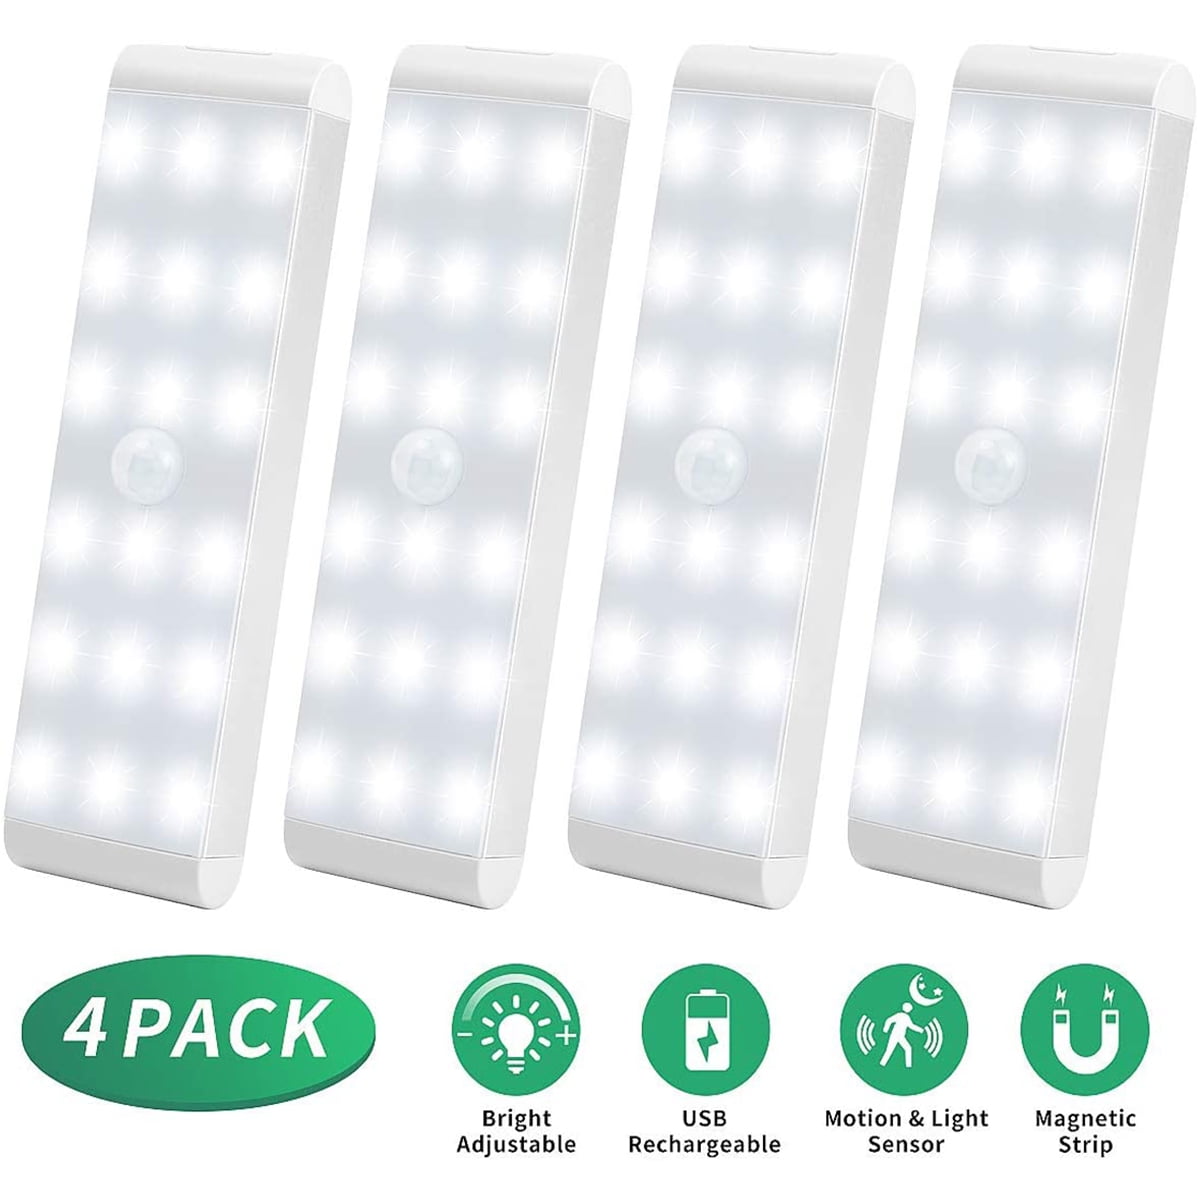 94-LED Dimmer Under Cabinet Light with Motion Sensor 3600mAh Large Battery Capacity Stick Anywhere Night Light Bar for Kitchen,Wardrobe,Workbench,Stairs DYD Closet Light 